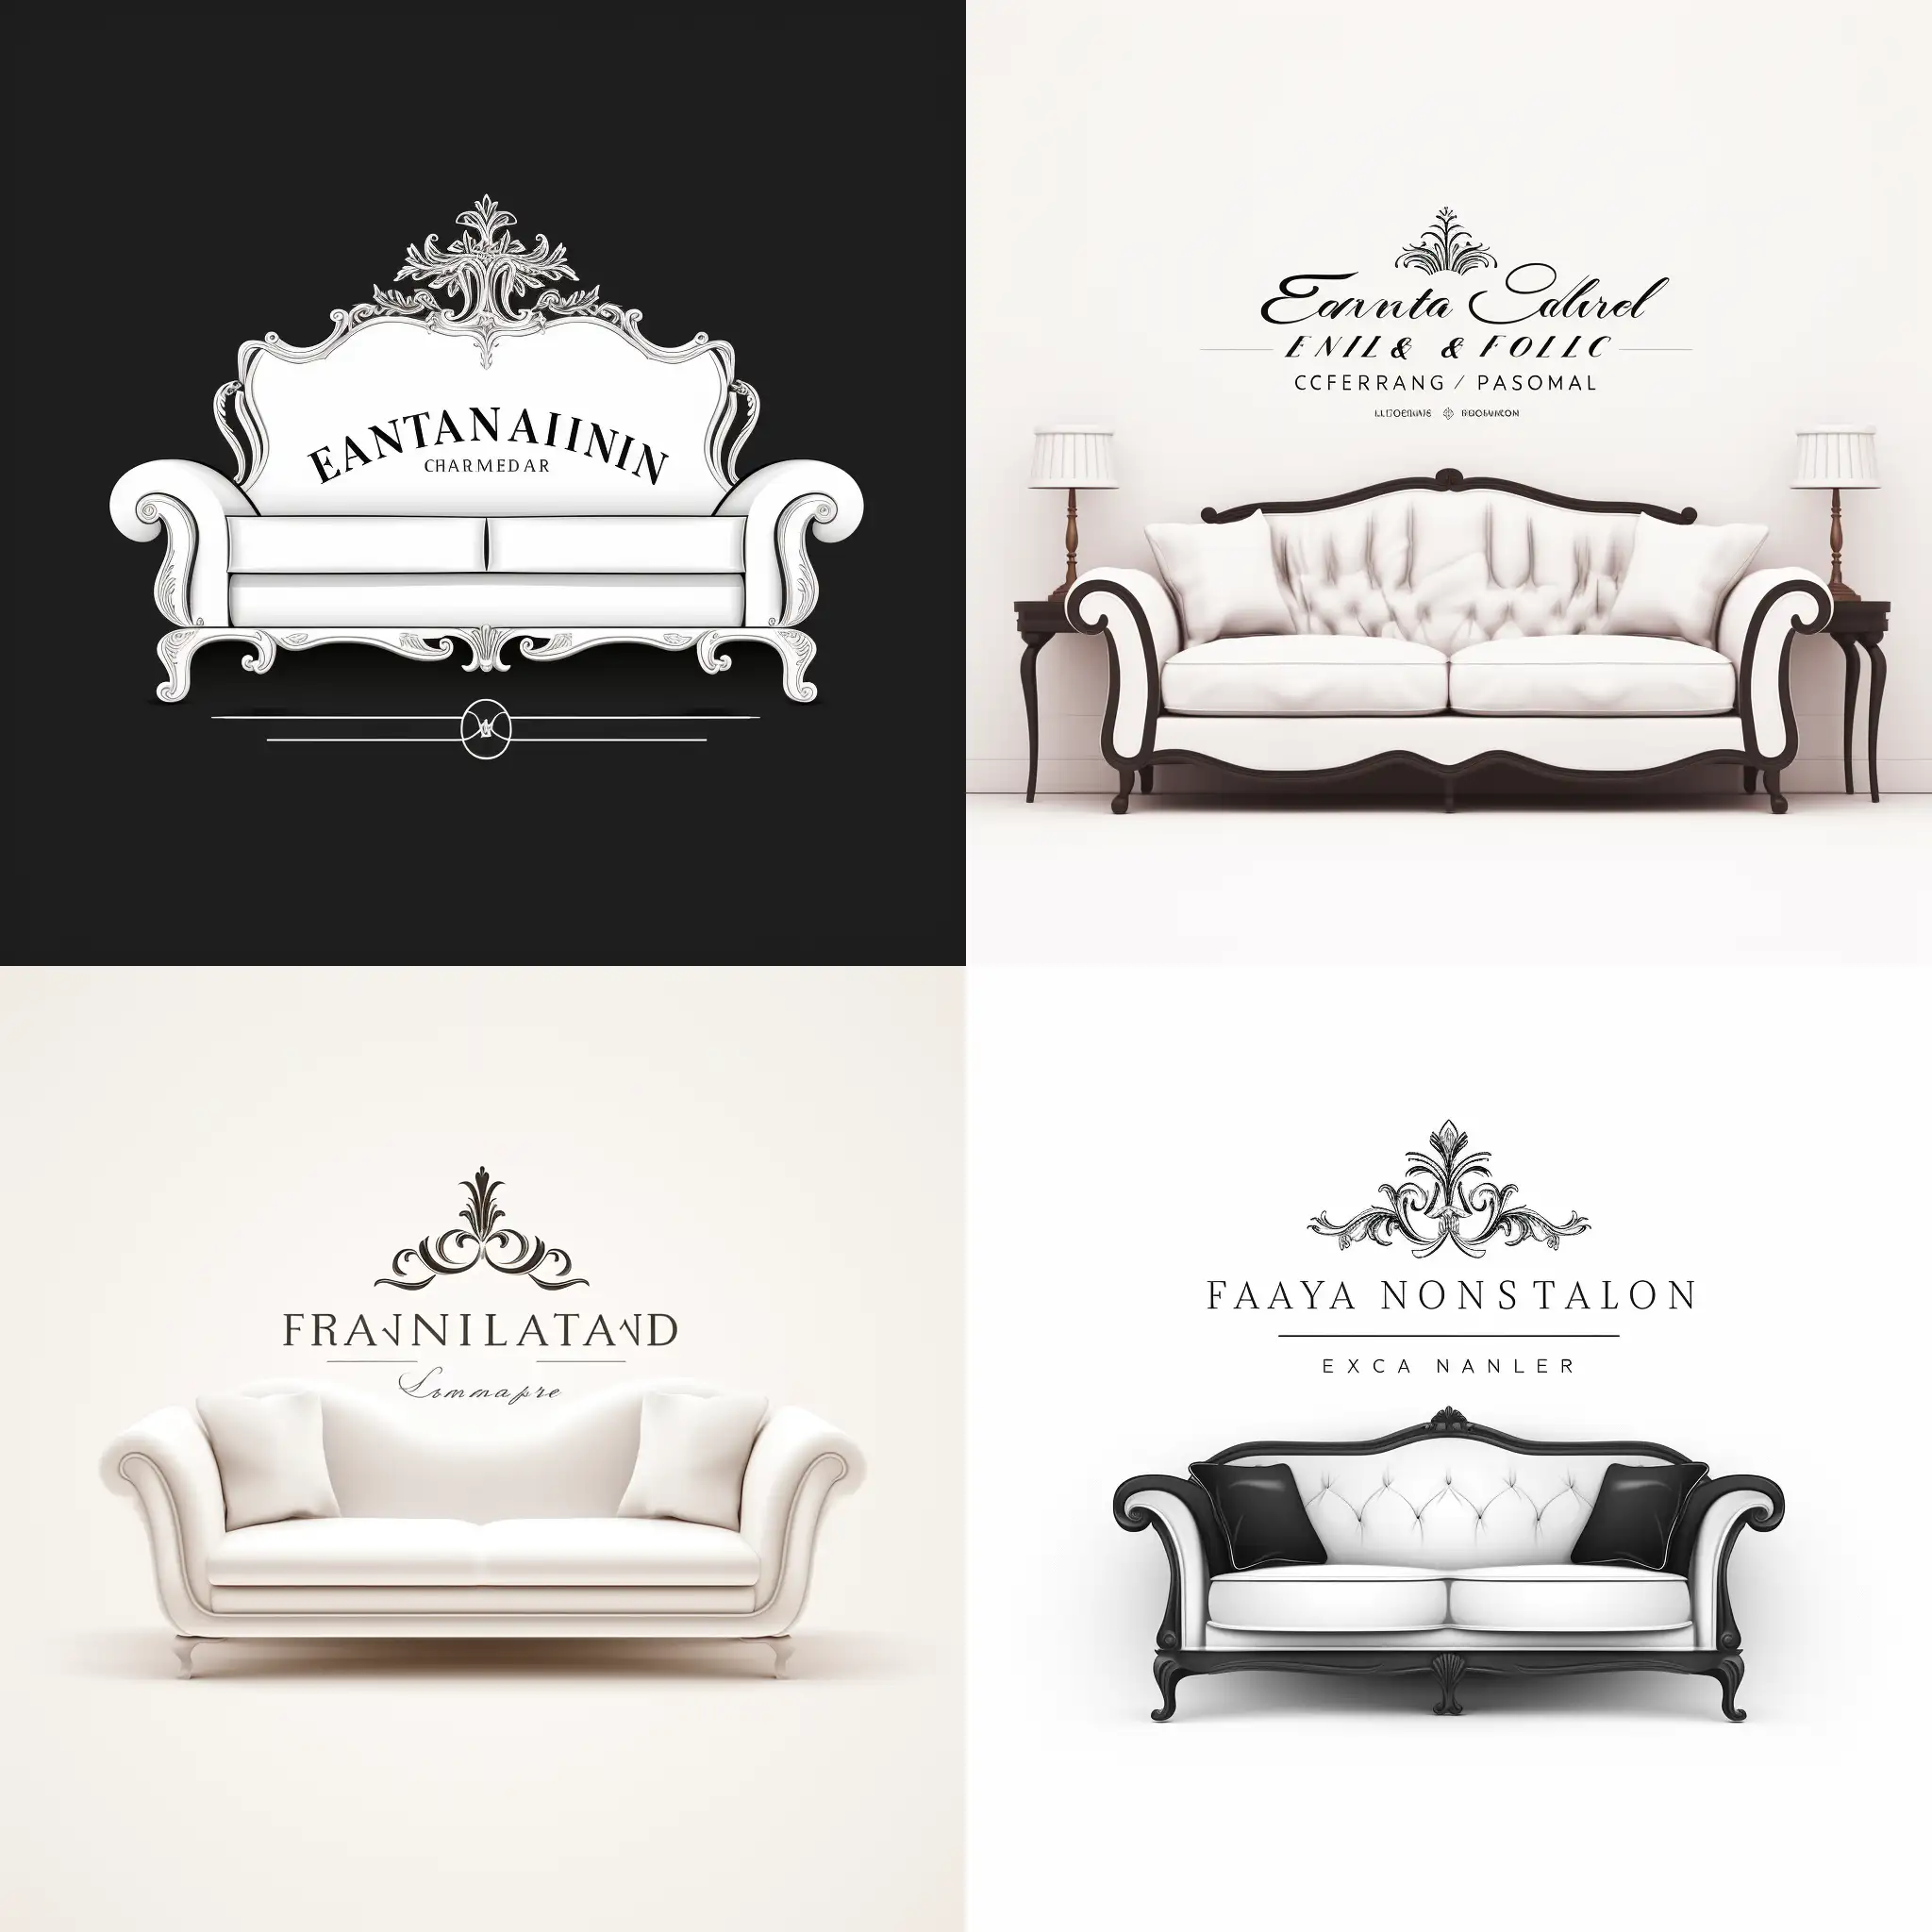 logo, cleaning services company, European style, black and white, SOFA company names